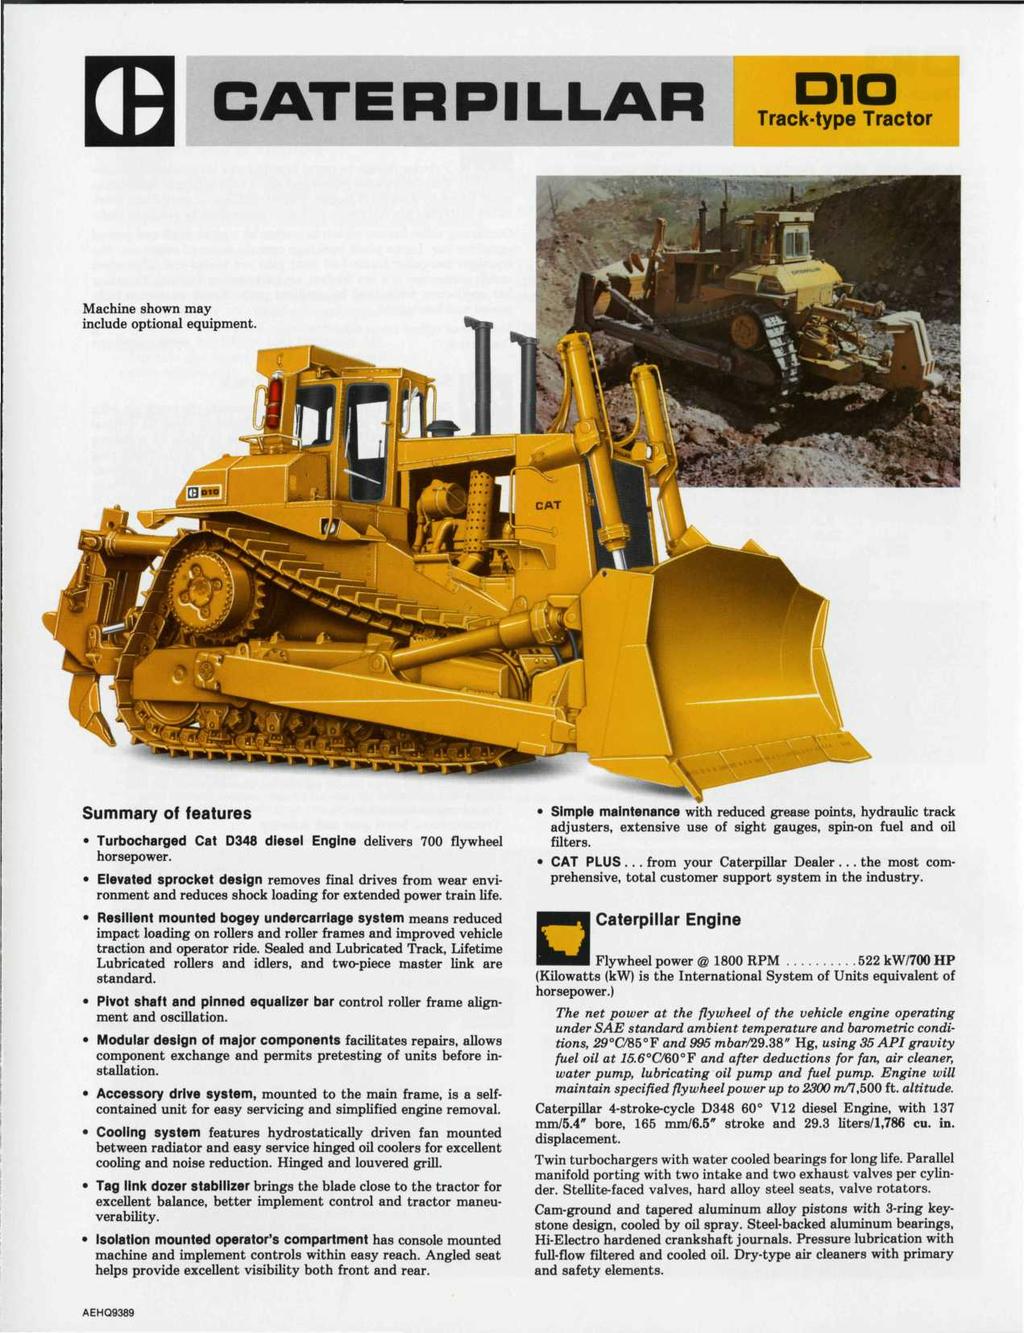 ^*^^ ' H "^ i A^H Track-type Tractor Machine shown may include optional equipment. Summary of features Turbocharged Cat D348 diesel Engine delivers 700 flywheel horsepower.